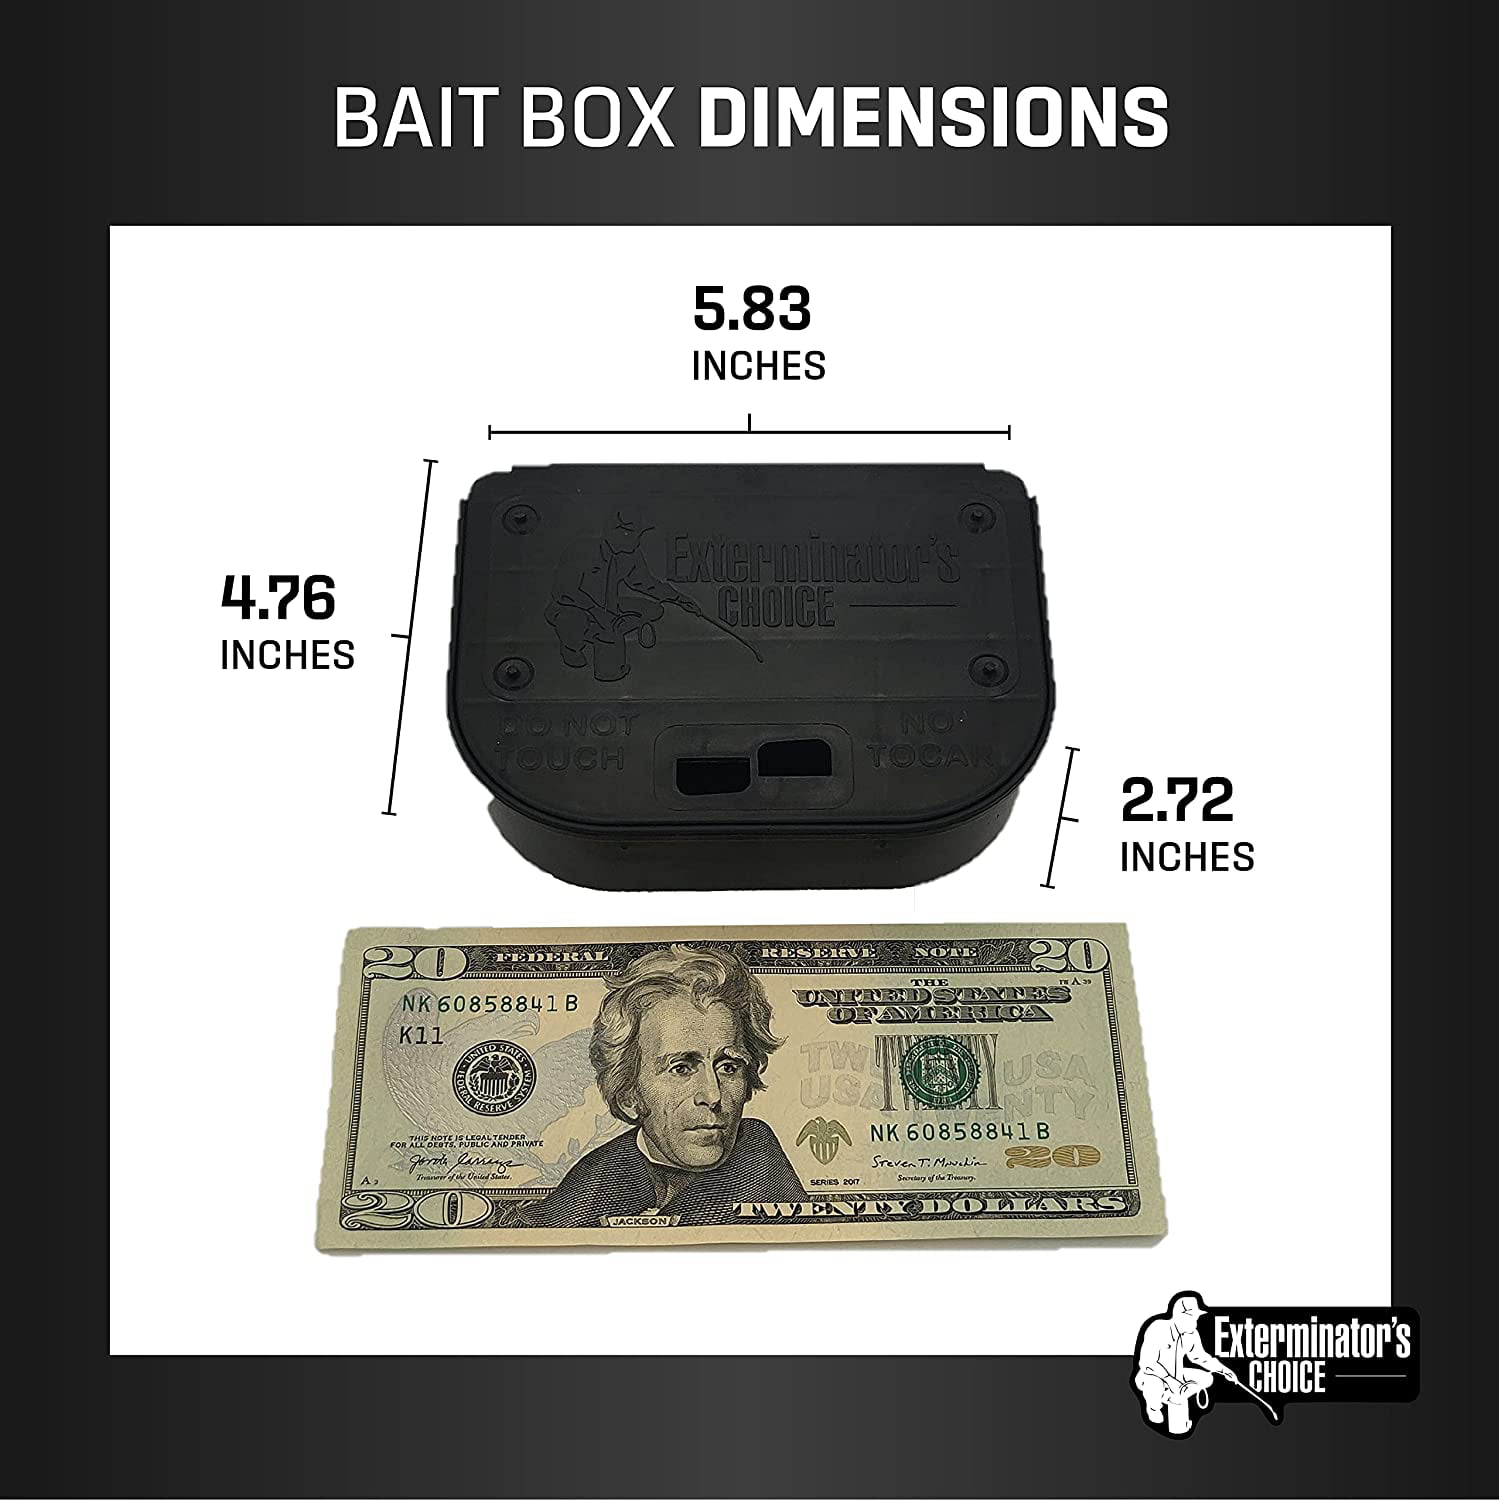 Exterminators Choice Bait Stations and One Key Included Bait Box